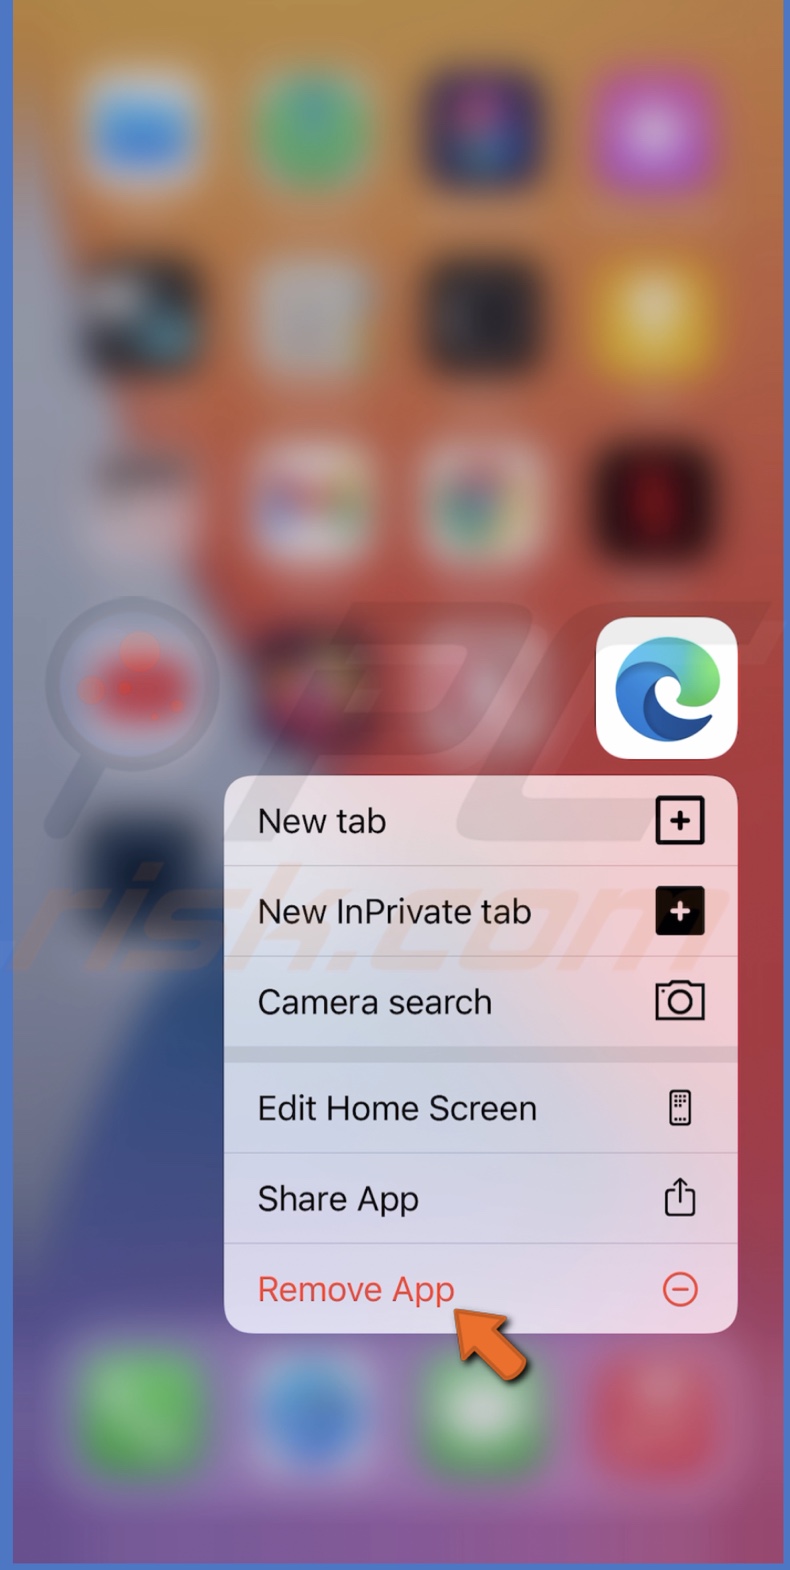 To hide app from Home Screen tap on Remove App